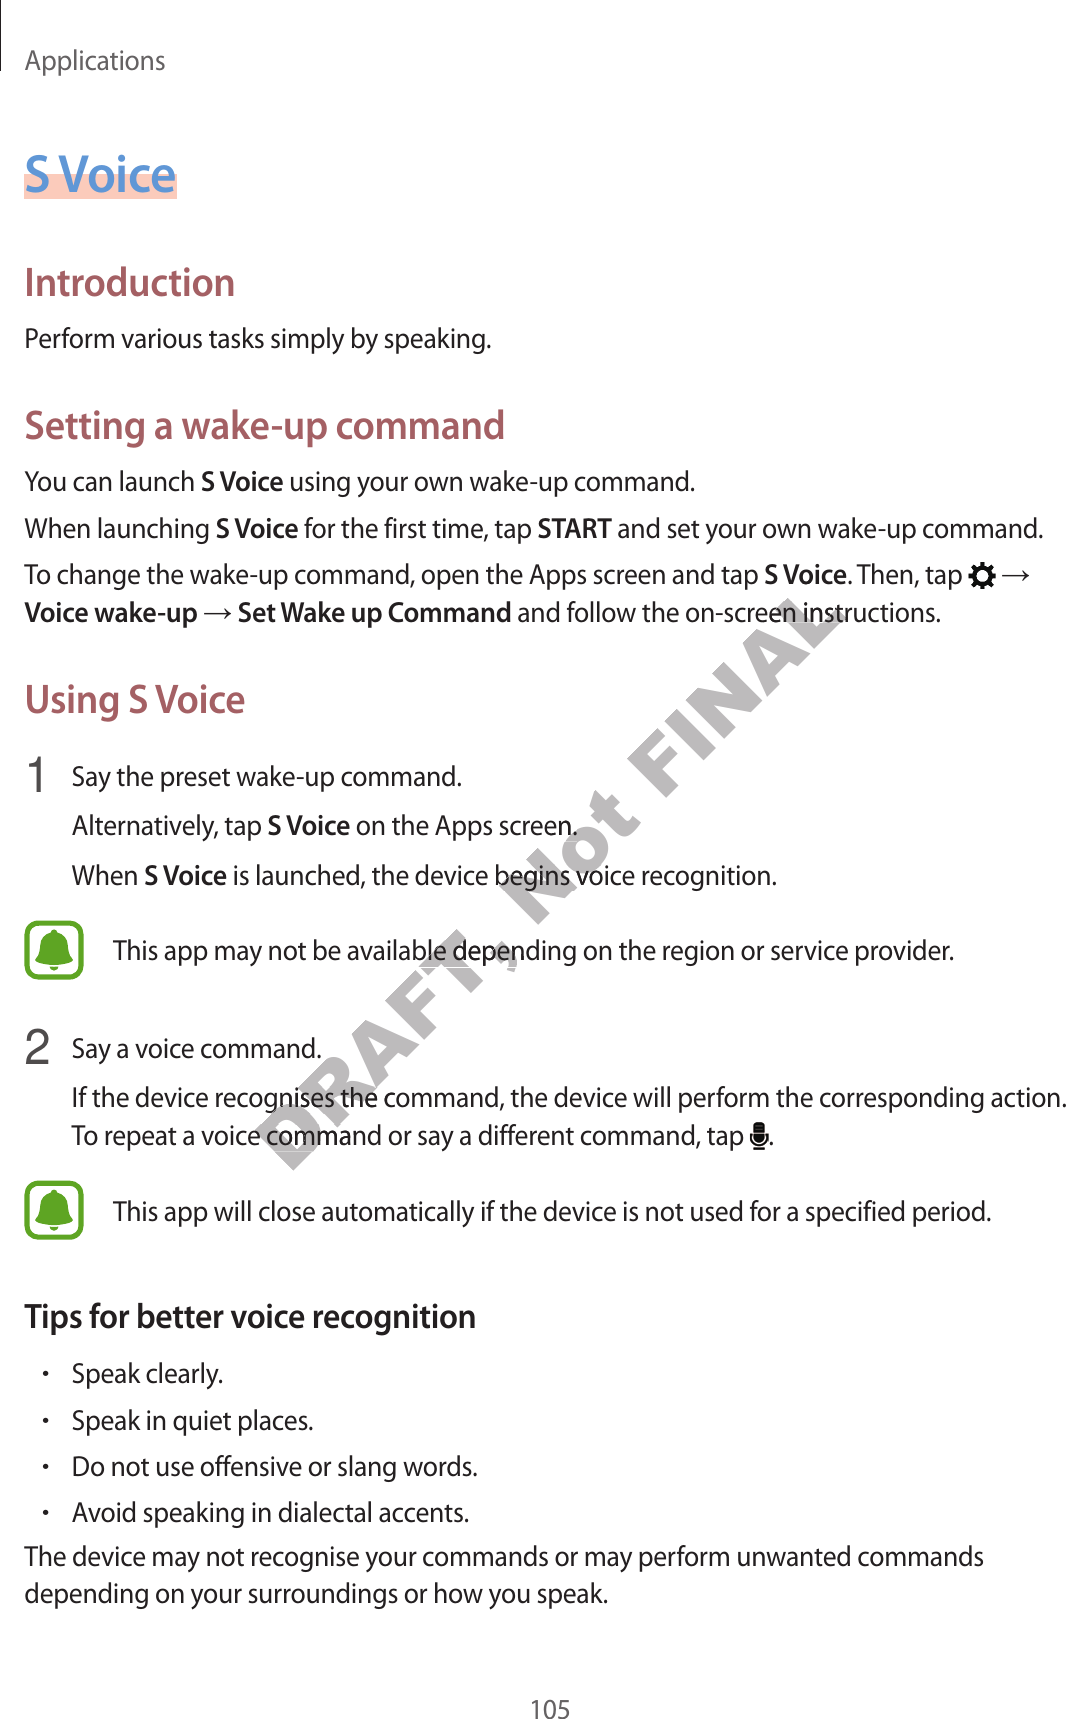 Applications105S V oiceIntroductionP erform various tasks simply by speaking.Setting a wake-up commandYou can launch S V oice using your own w ake-up command.When launching S V oice for the first time , tap START and set your own w ake-up command.To change the wake-up command, open the A pps scr een and tap S V oice. Then, tap    Voice wak e-up  Set Wake up Command and follo w the on-scr een instructions.Using S Voice1 Say the preset w ake-up command .Alternativ ely, tap S V oice on the Apps screen.When S V oice is launched, the device beg ins v oic e r ecog nition.This app may not be a vailable depending on the r eg ion or service provider.2 Say a voic e command .If the device recog nises the command , the devic e will perform the c orresponding action. To repeat a v oic e command or sa y a diff er en t command , tap  .This app will close automatically if the devic e is not used f or a specified period .T ips f or bett er v oic e r ec ognition•Speak clearly.•Speak in quiet places.•Do not use offensiv e or slang w or ds .•A v oid speaking in dialectal accen ts .The device ma y not r ecog nise y our c ommands or may perform unwant ed c ommands depending on your surroundings or ho w y ou speak.DRAFT, This app may not be a vailable depending on the r eg ion or service provider.DRAFT, This app may not be a vailable depending on the r eg ion or service provider.Say a voic e command .DRAFT, Say a voic e command .If the device recog nises the command , the devic e will perform the c orresponding action. DRAFT, If the device recog nises the command , the devic e will perform the c orresponding action. To repeat a v oic e command or sa y a diff er en t command , tap DRAFT, To repeat a v oic e command or sa y a diff er en t command , tap Not  on the Apps screen.Not  on the Apps screen. is launched, the device beg ins v oic e r ecog nition.Not  is launched, the device beg ins v oic e r ecog nition.FINALS V oiceFINALS V oice and follo w the on-scr een instructions.FINAL and follo w the on-scr een instructions.